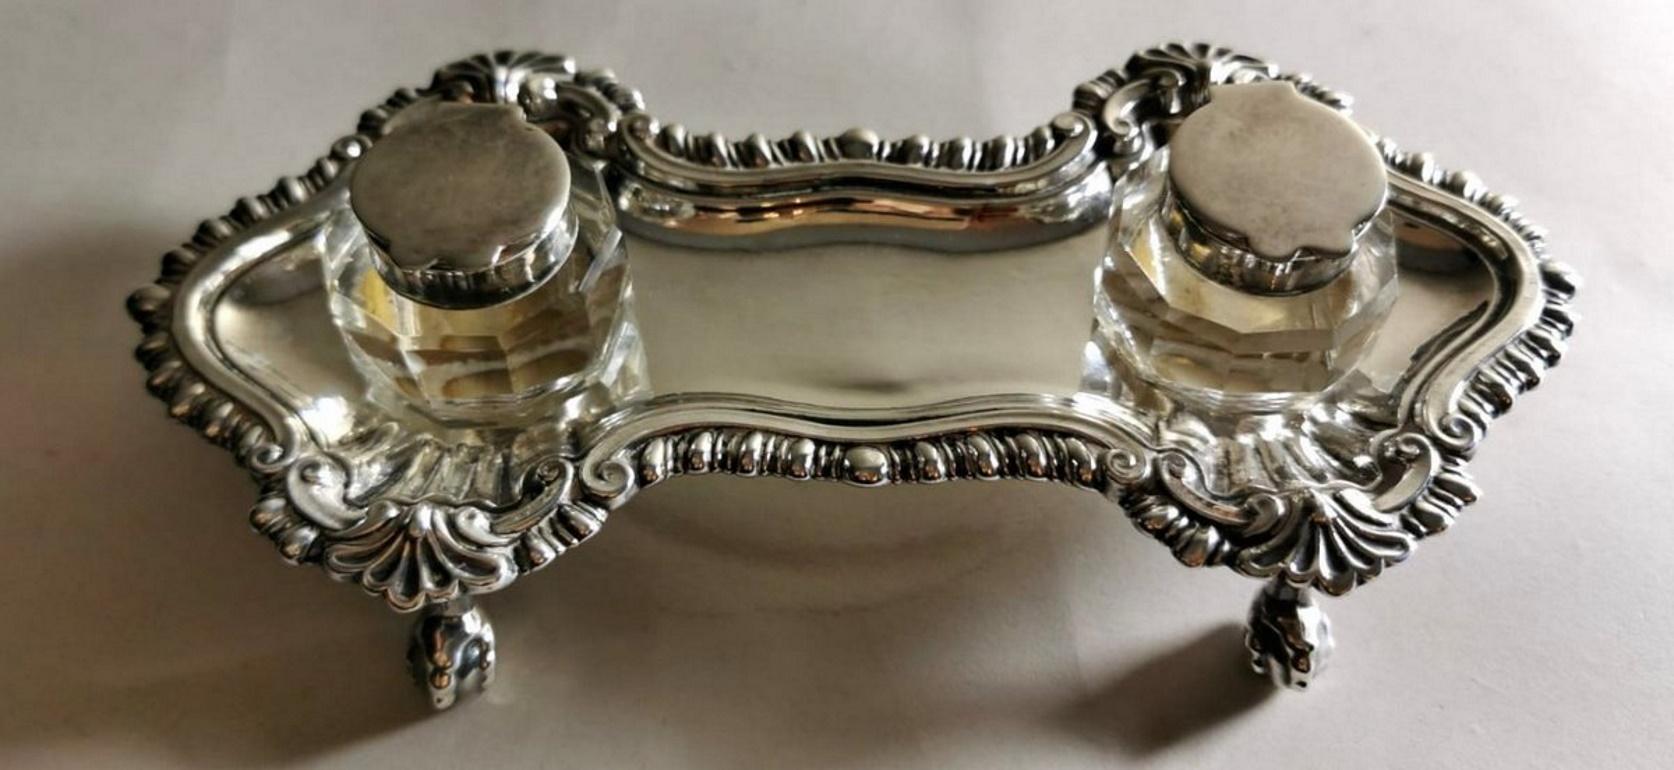 We kindly suggest you read the whole description, because with it we try to give you detailed technical and historical information to guarantee the authenticity of our objects.
Refined and graceful silver plated inkwell; it has a balanced and